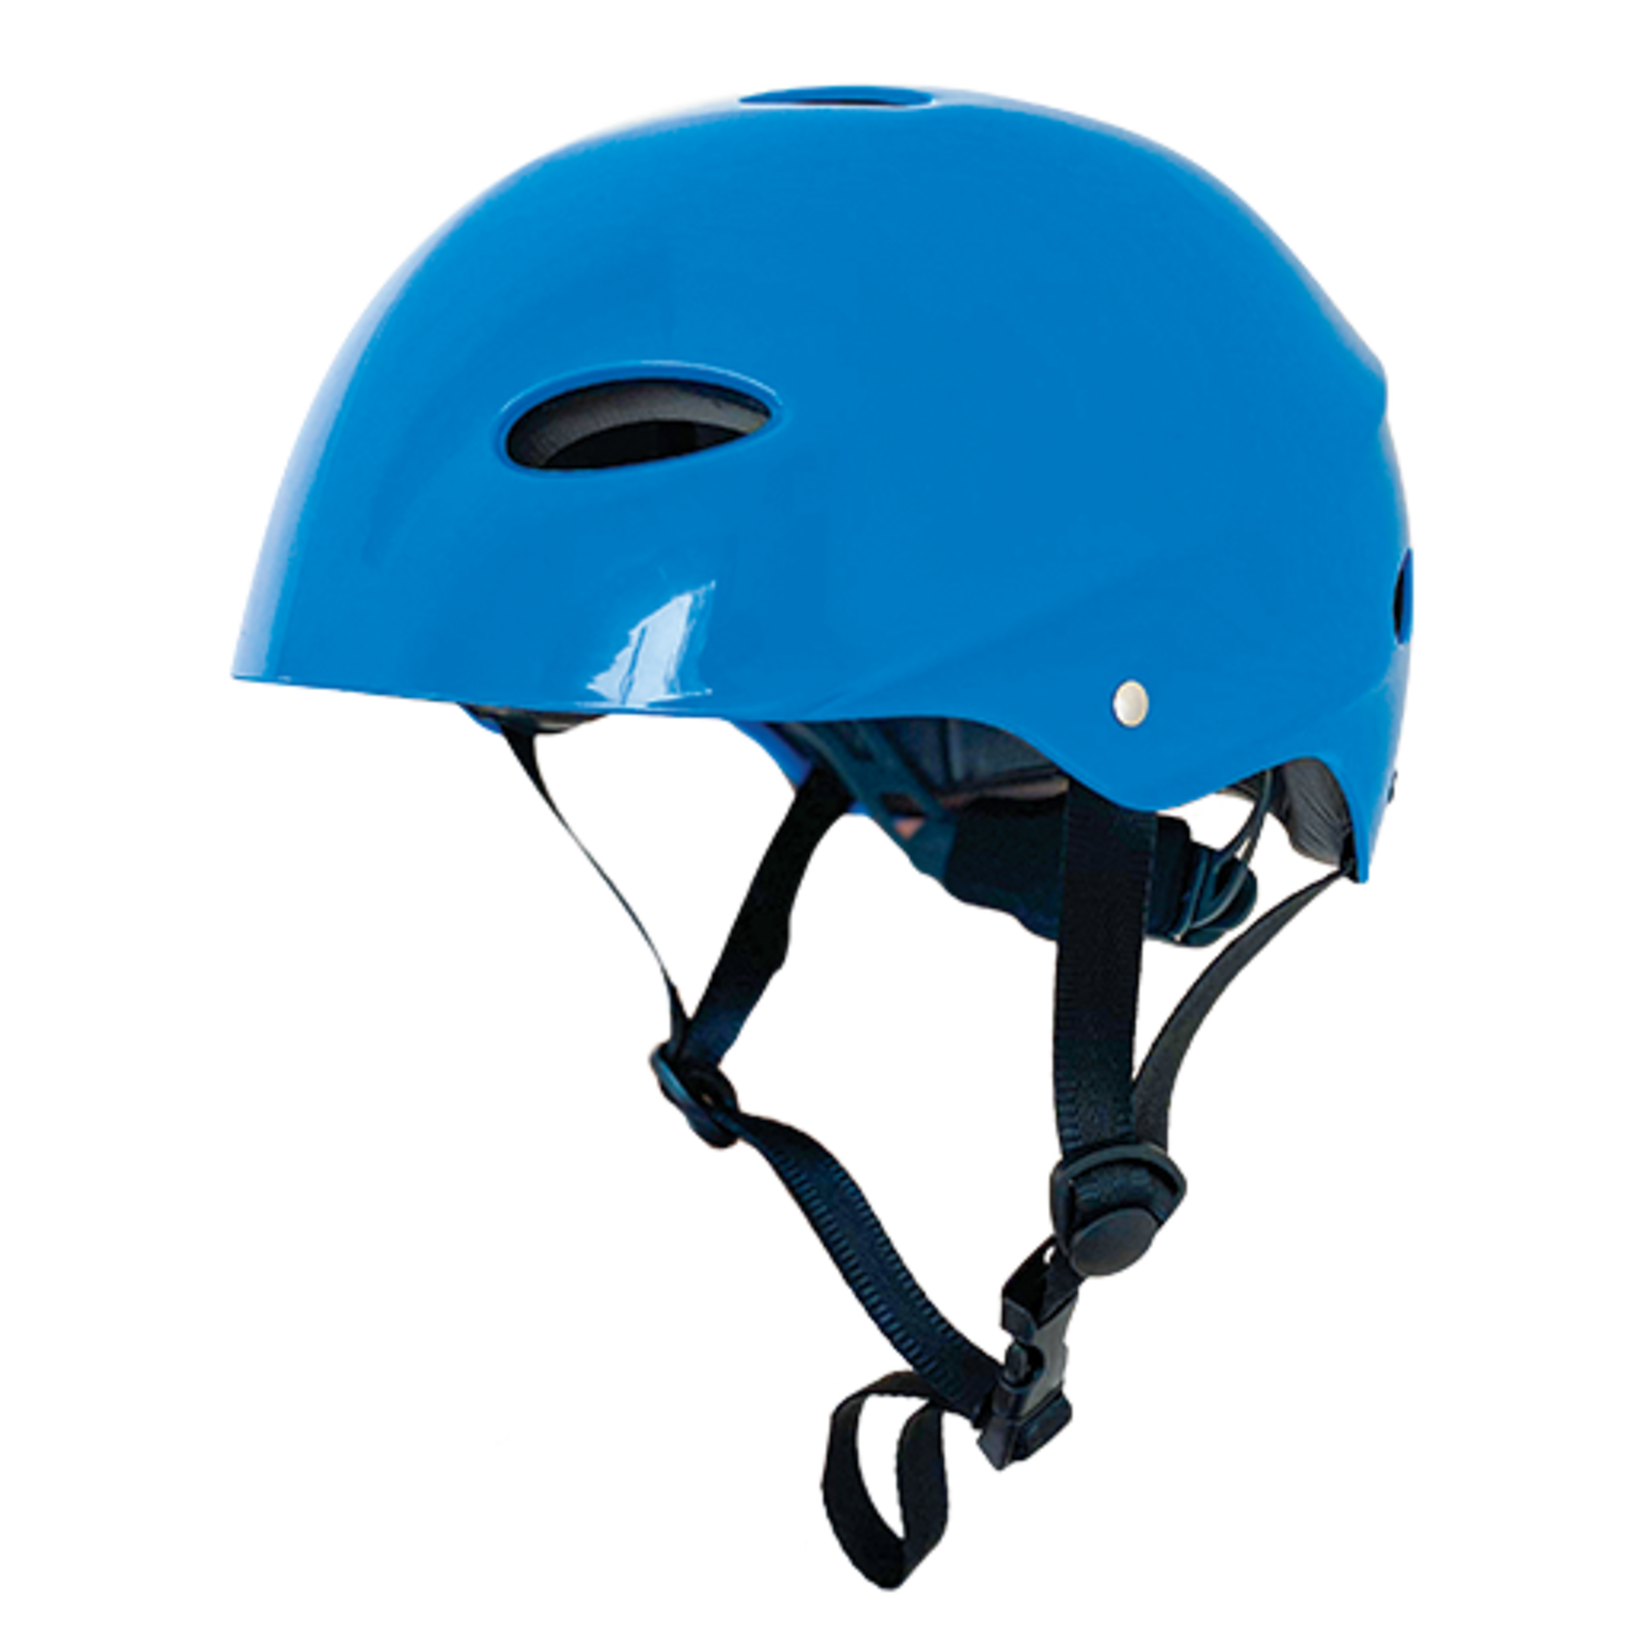 Hyside Inflatables Hyside PRO CE Helmet